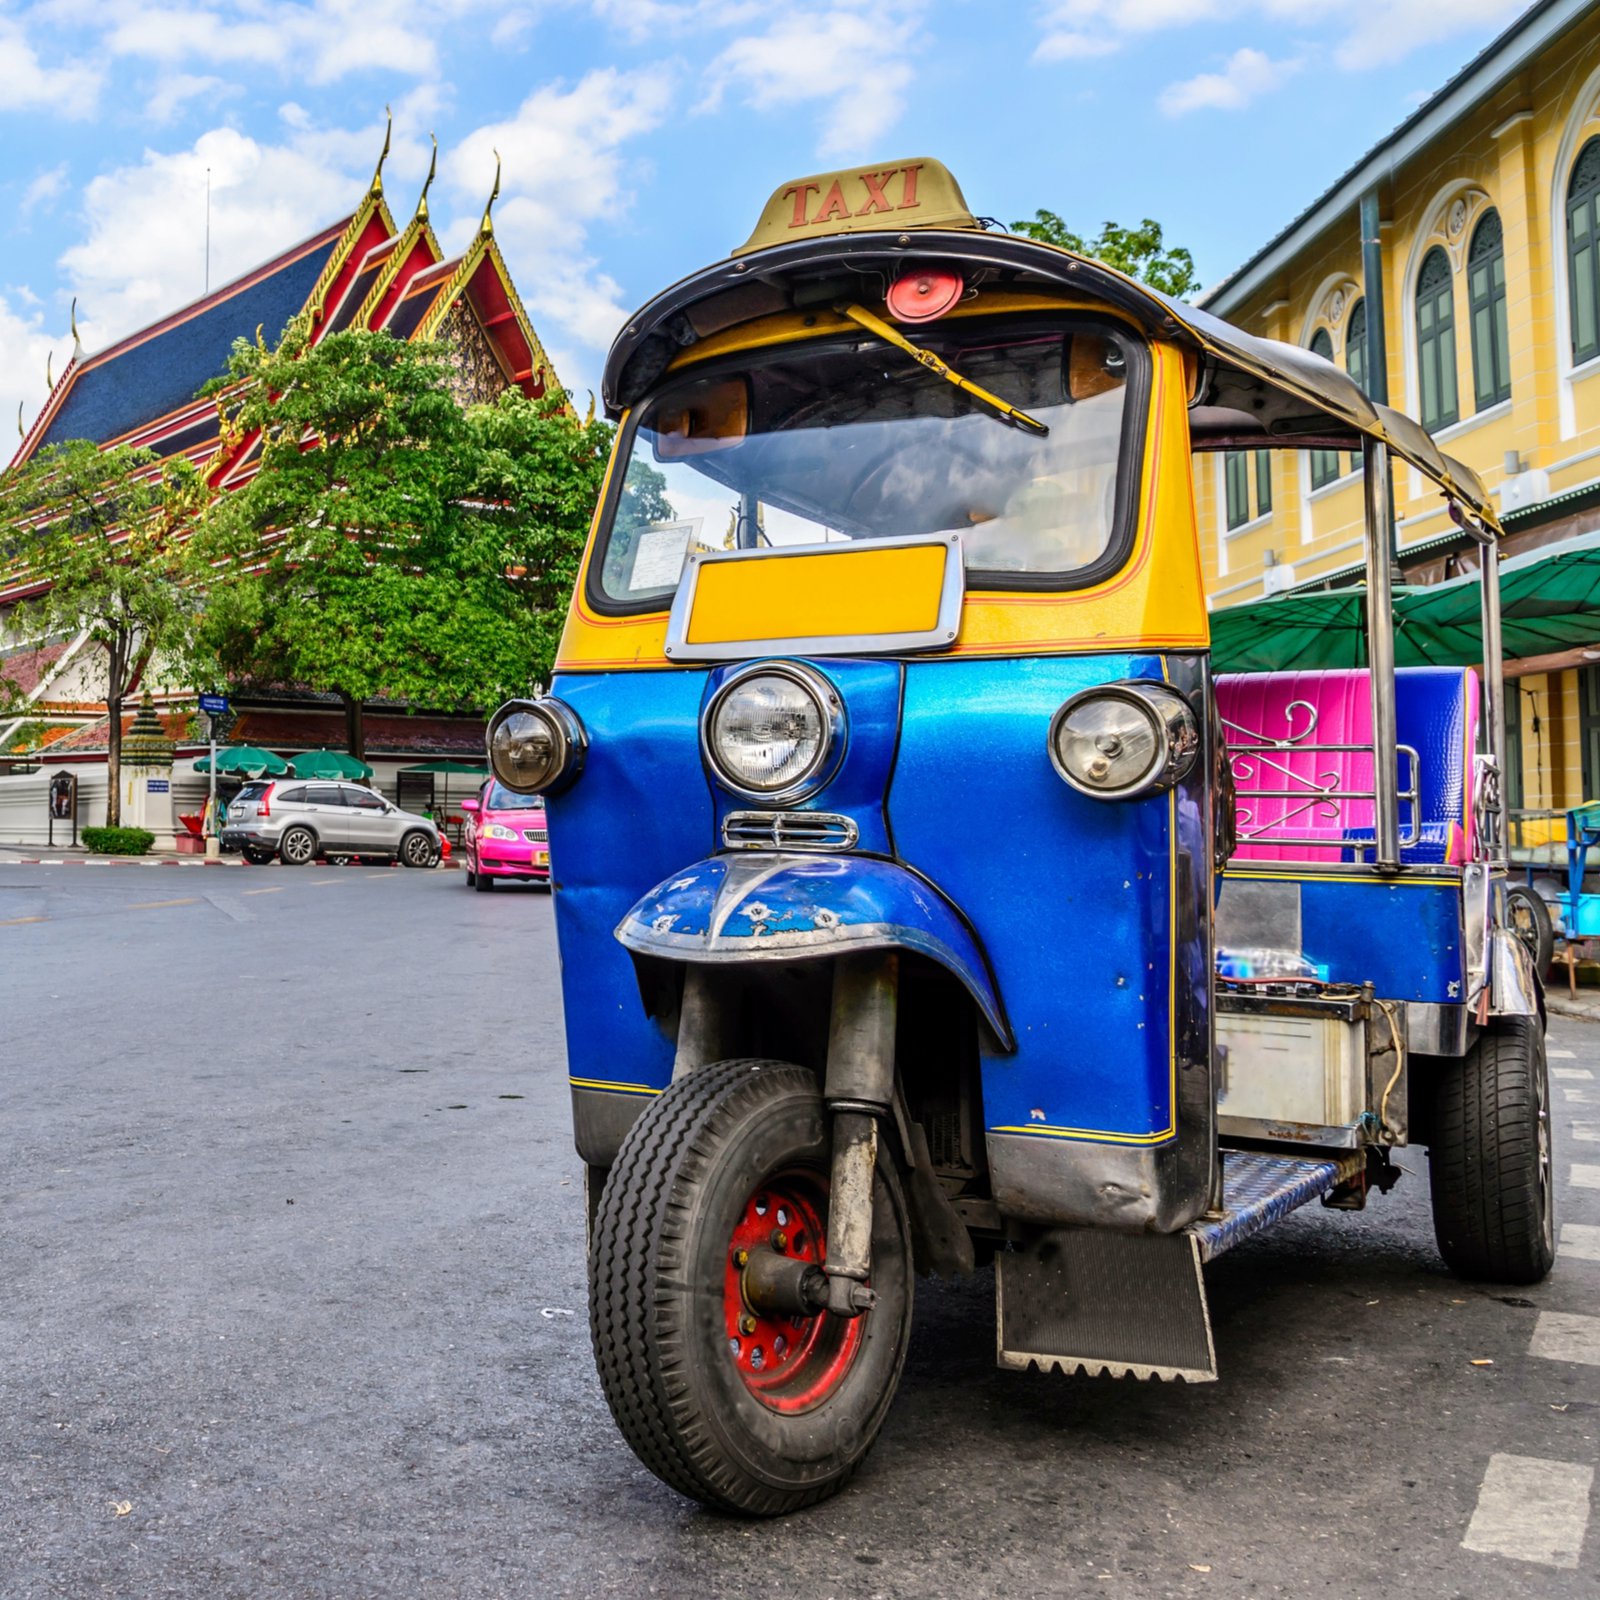 Former Thai Finance Minister Supports Proposals for an SEC-Regulated Cryptocurrency Sector